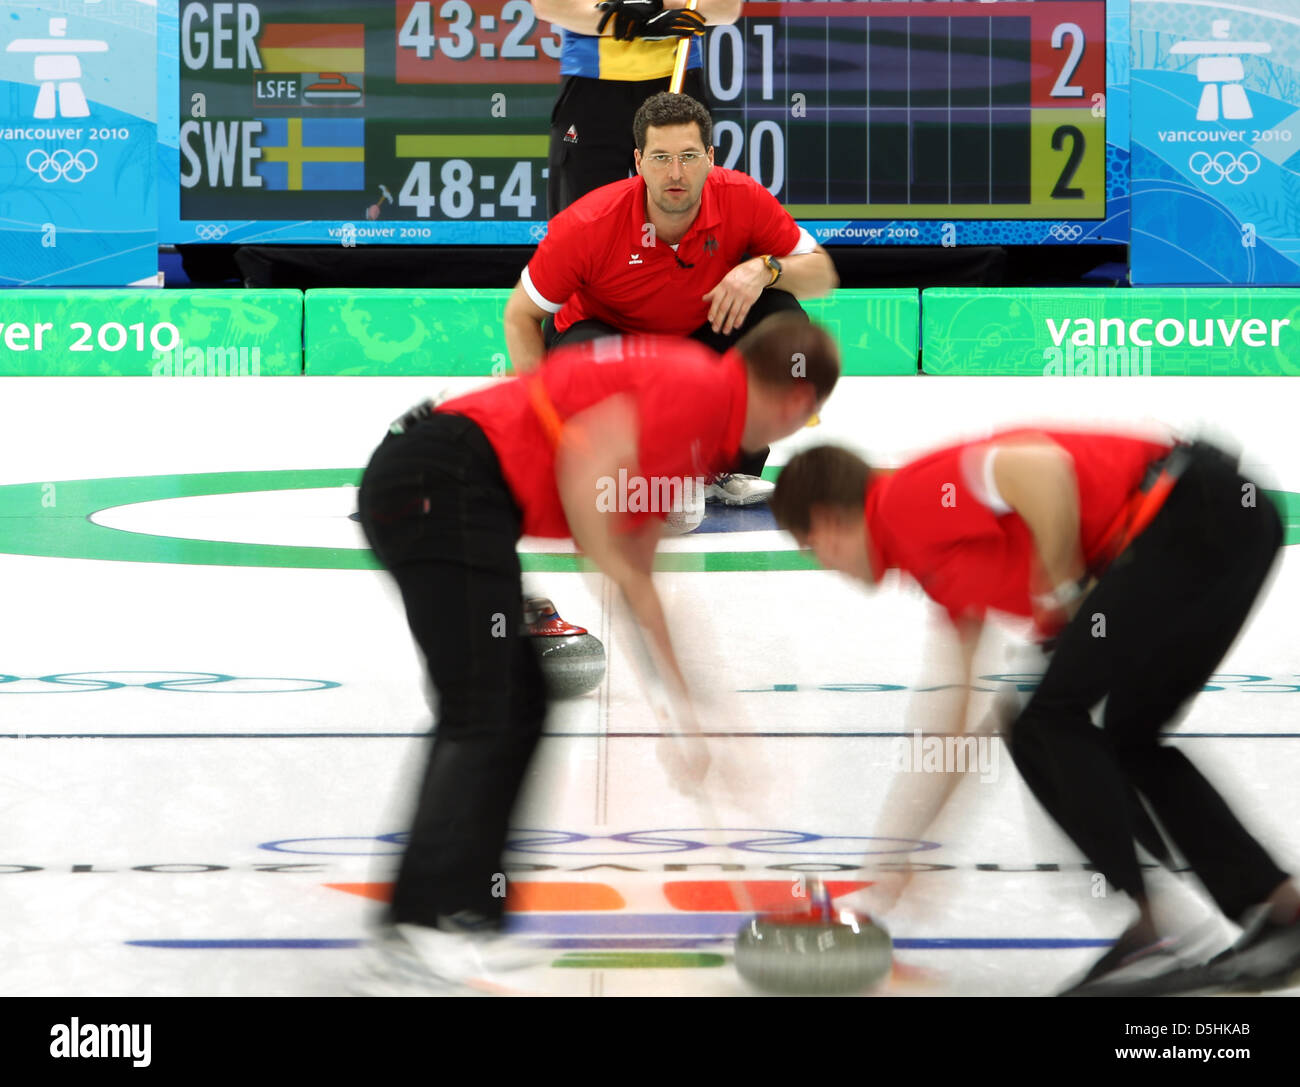 Germany's Holger Hoehne (L) and Andy Lang (R) sweep to guide the stone under instruction of skip Andy Kapp during Curling men's round robin session 3 at the Olympic Center during the Vancouver 2010 Olympic Games in Vancouver, Canada 17 February 2010. Germany's opponent was Sweden. Photo: Daniel Karmann  +++(c) dpa - Bildfunk+++ Stock Photo